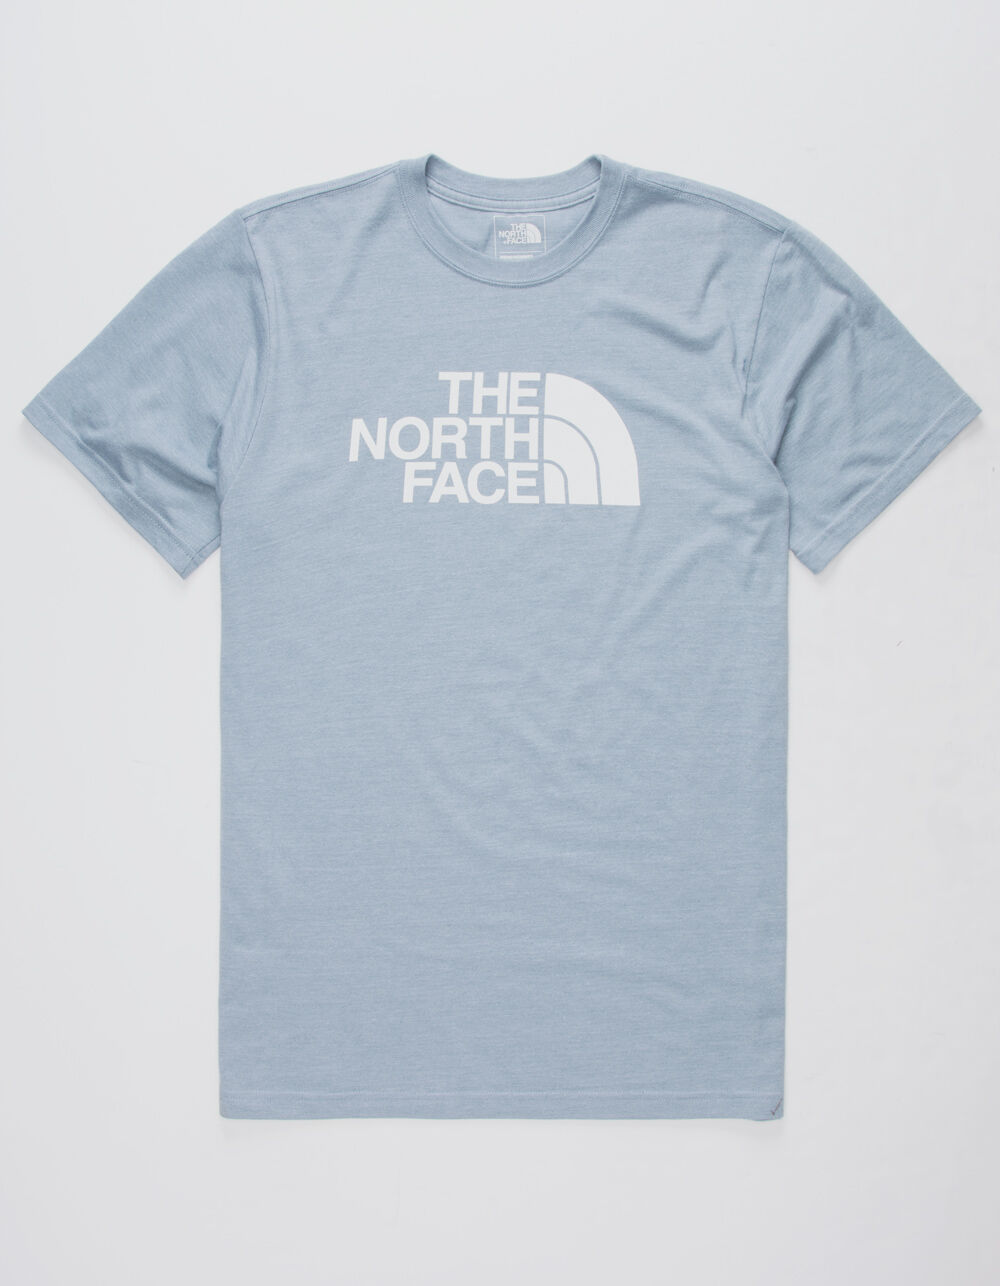 THE NORTH FACE Half Dome Triblend Blue Mens T-Shirt image number 0